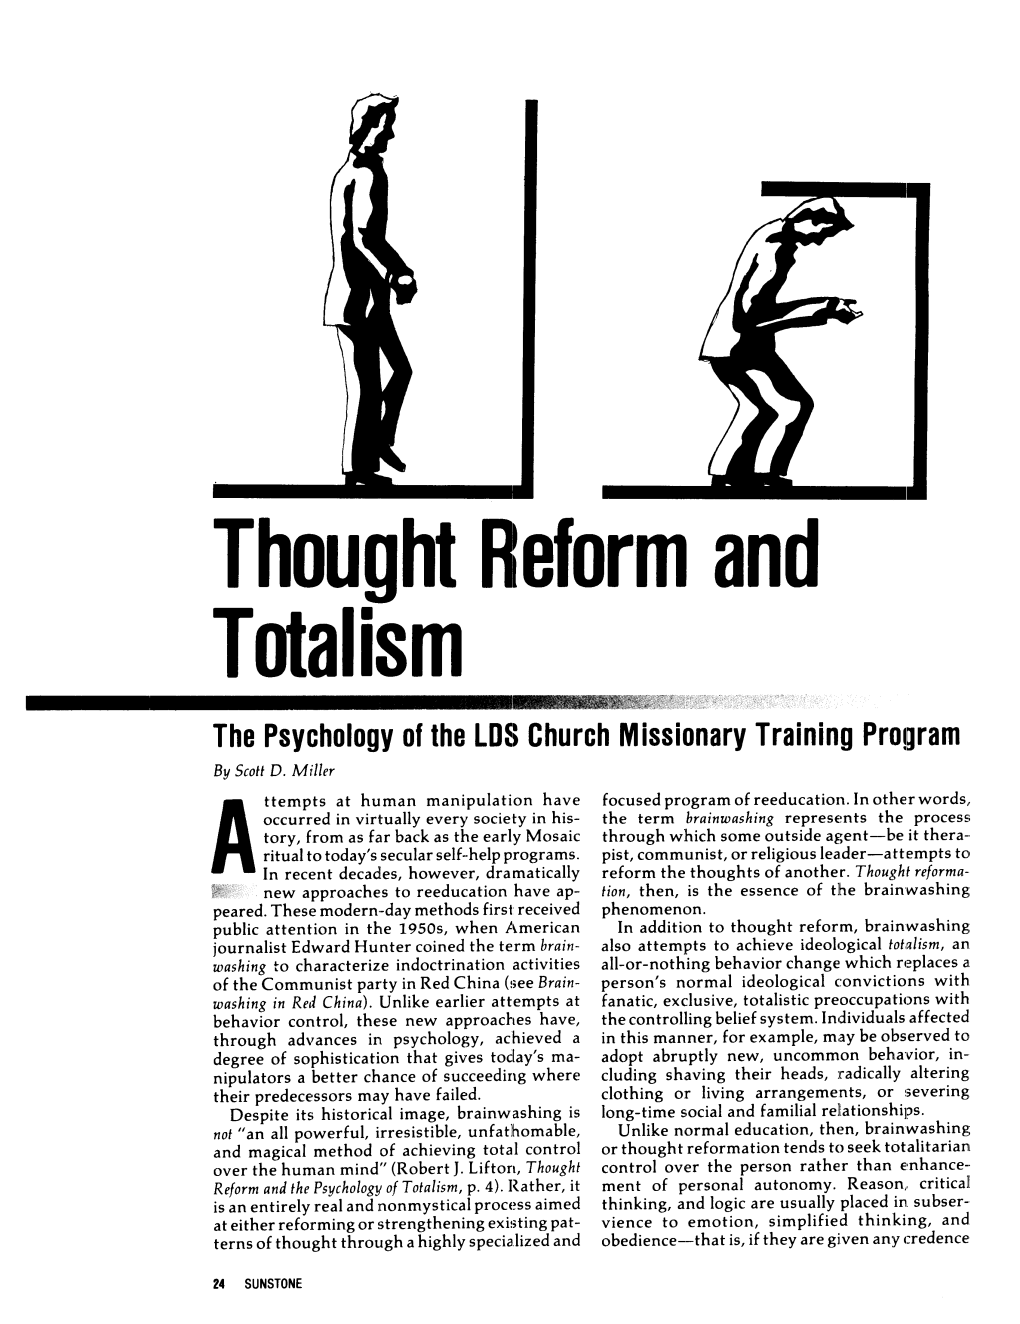 Thought Reform and Totalism the Psychology of the LDS Church Missionary Training Program by Scott D